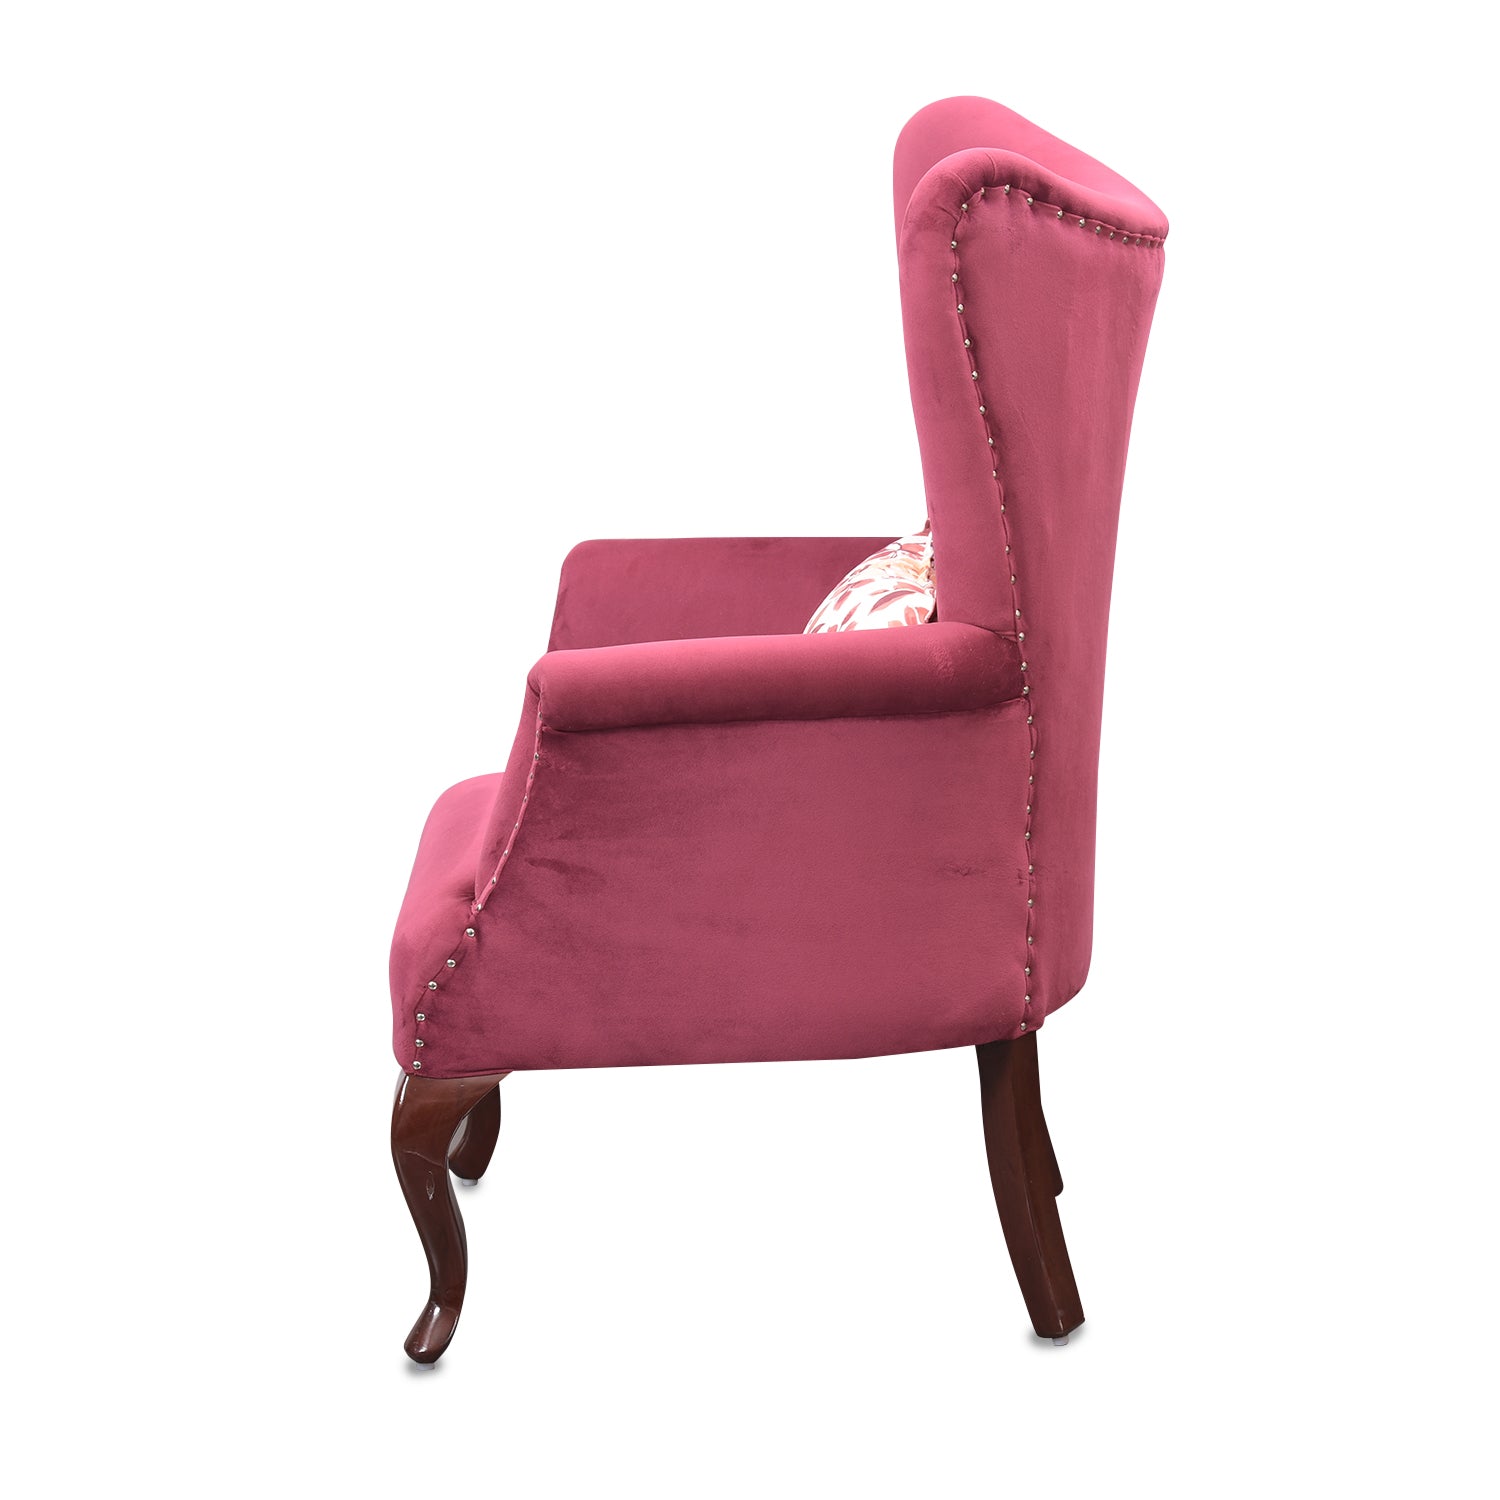 Orchid 1 Lounge Chair by Zorin in Wine Color Zorin